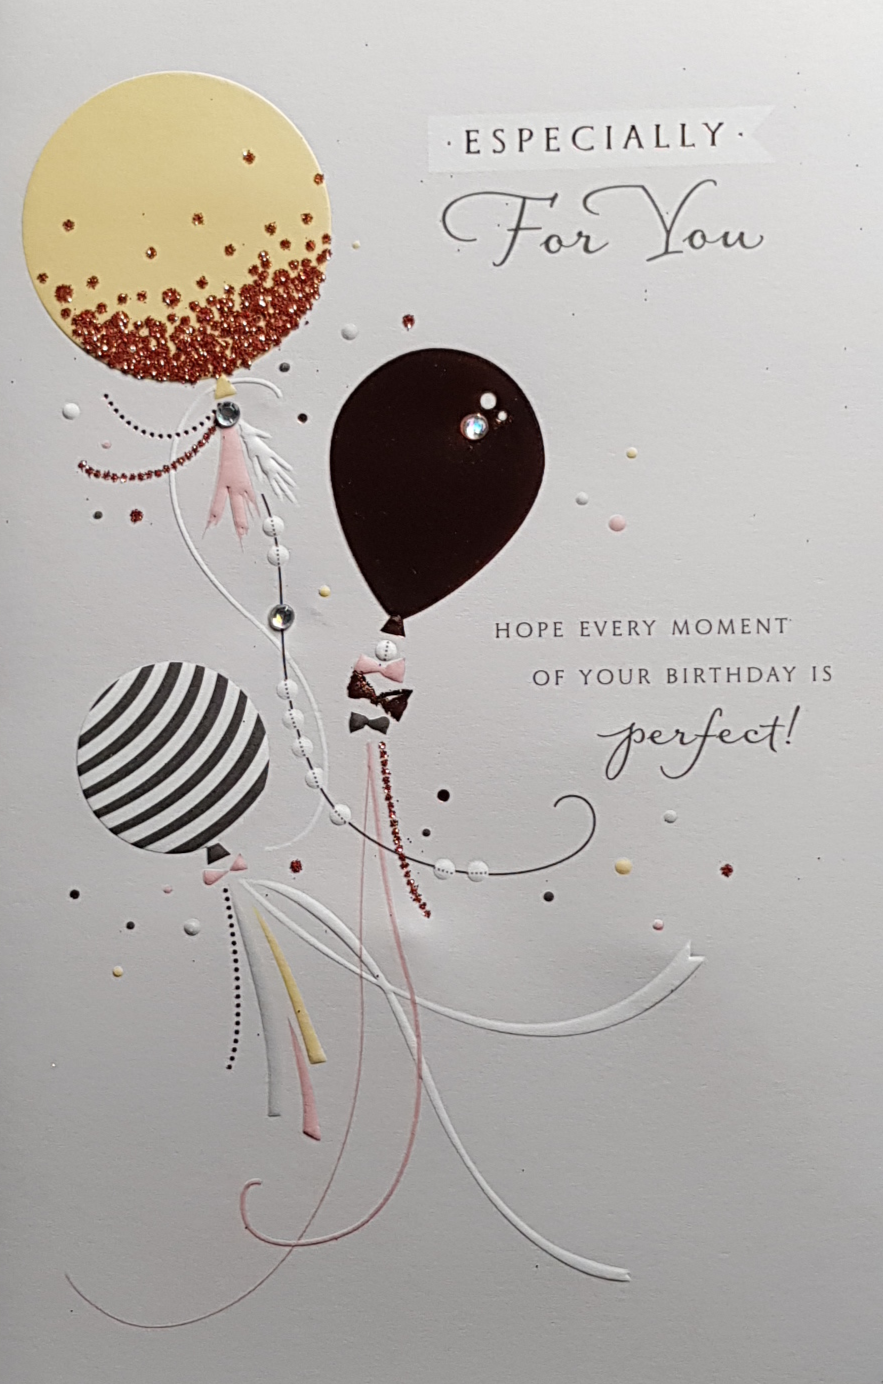 Birthday Card - General / Especially For You & Balloons